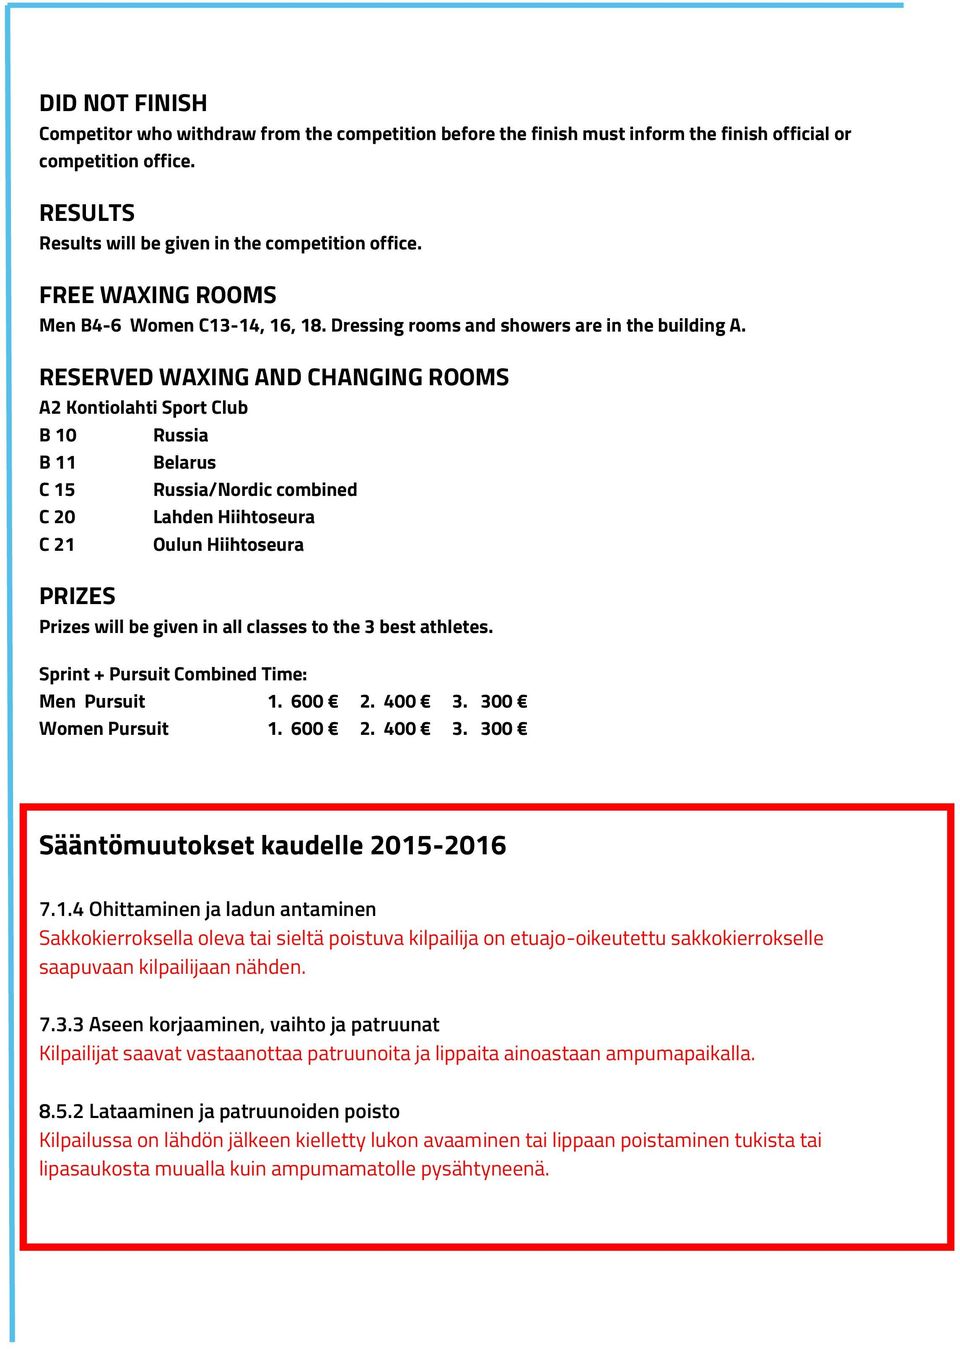 RESERVED WAXING AND CHANGING ROOMS A2 Kontiolahti Sport Club B 10 Russia B 11 Belarus C 15 Russia/Nordic combined C 20 Lahden Hiihtoseura C 21 Oulun Hiihtoseura PRIZES Prizes will be given in all